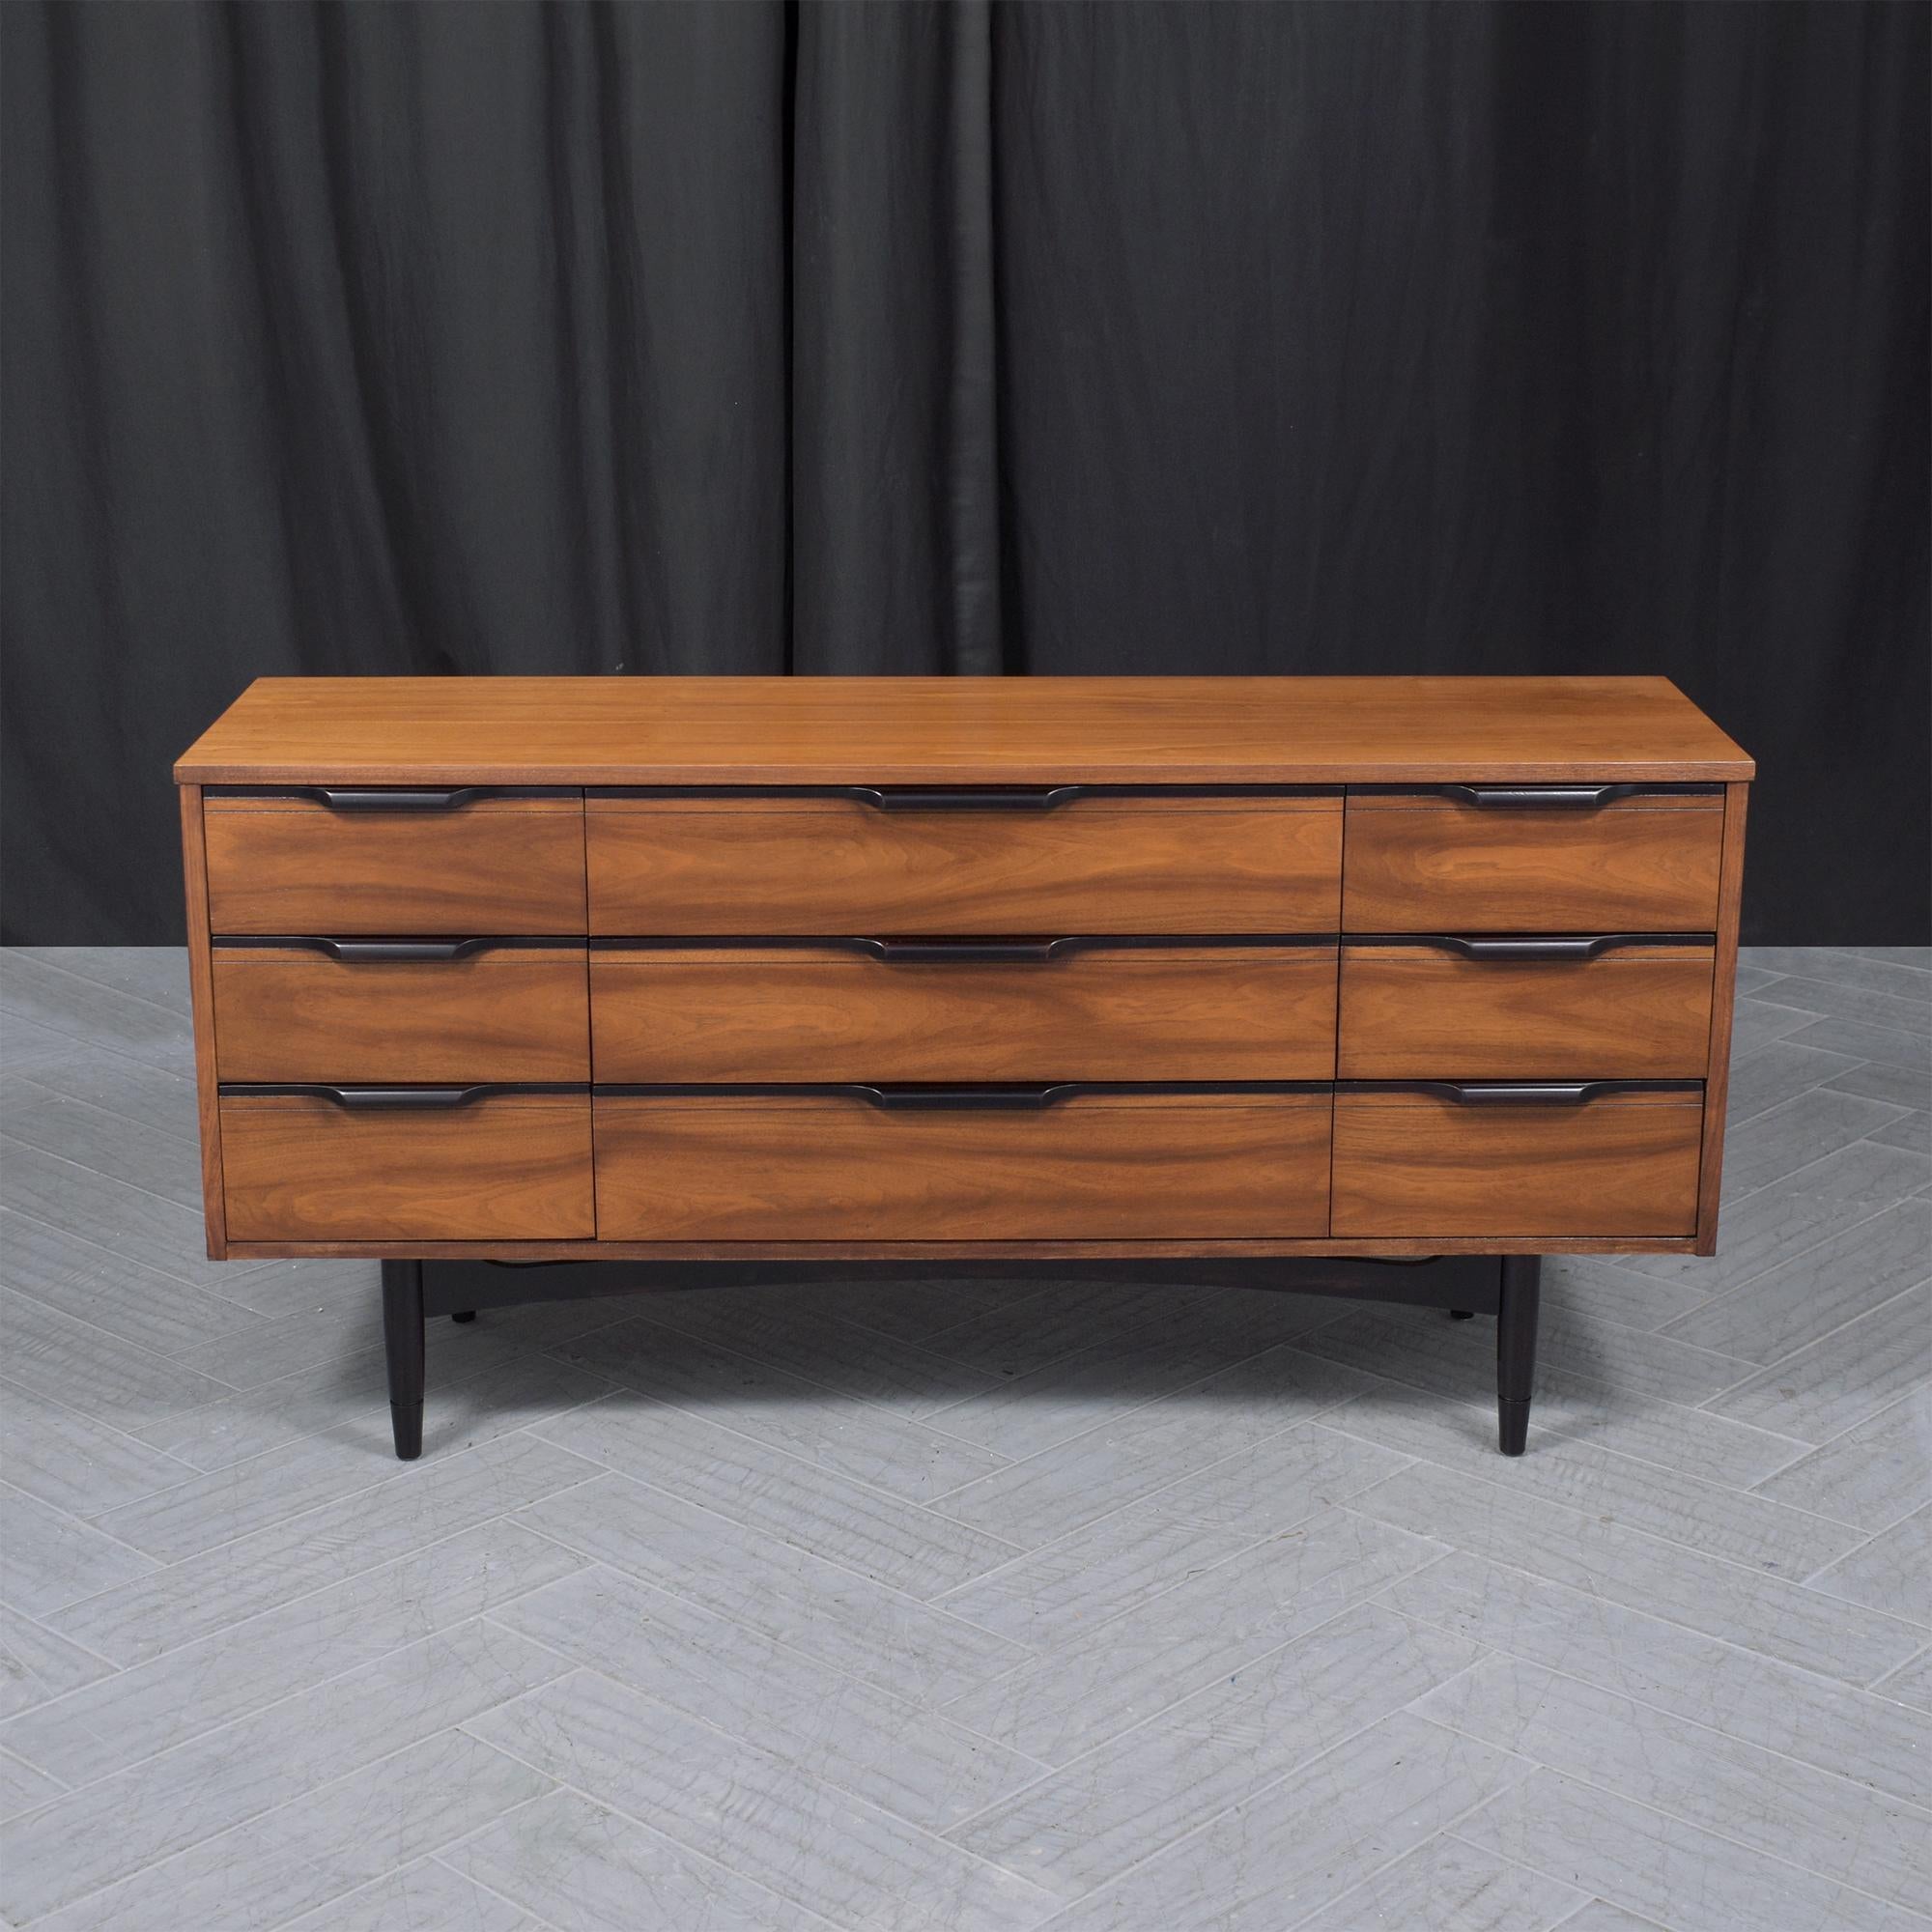 Elevate your living or dining room decor with this striking 1960s Mid-Century Modern walnut credenza. Meticulously hand-crafted from walnut wood, this vintage dresser stands out in its great condition, having been expertly restored by our dedicated